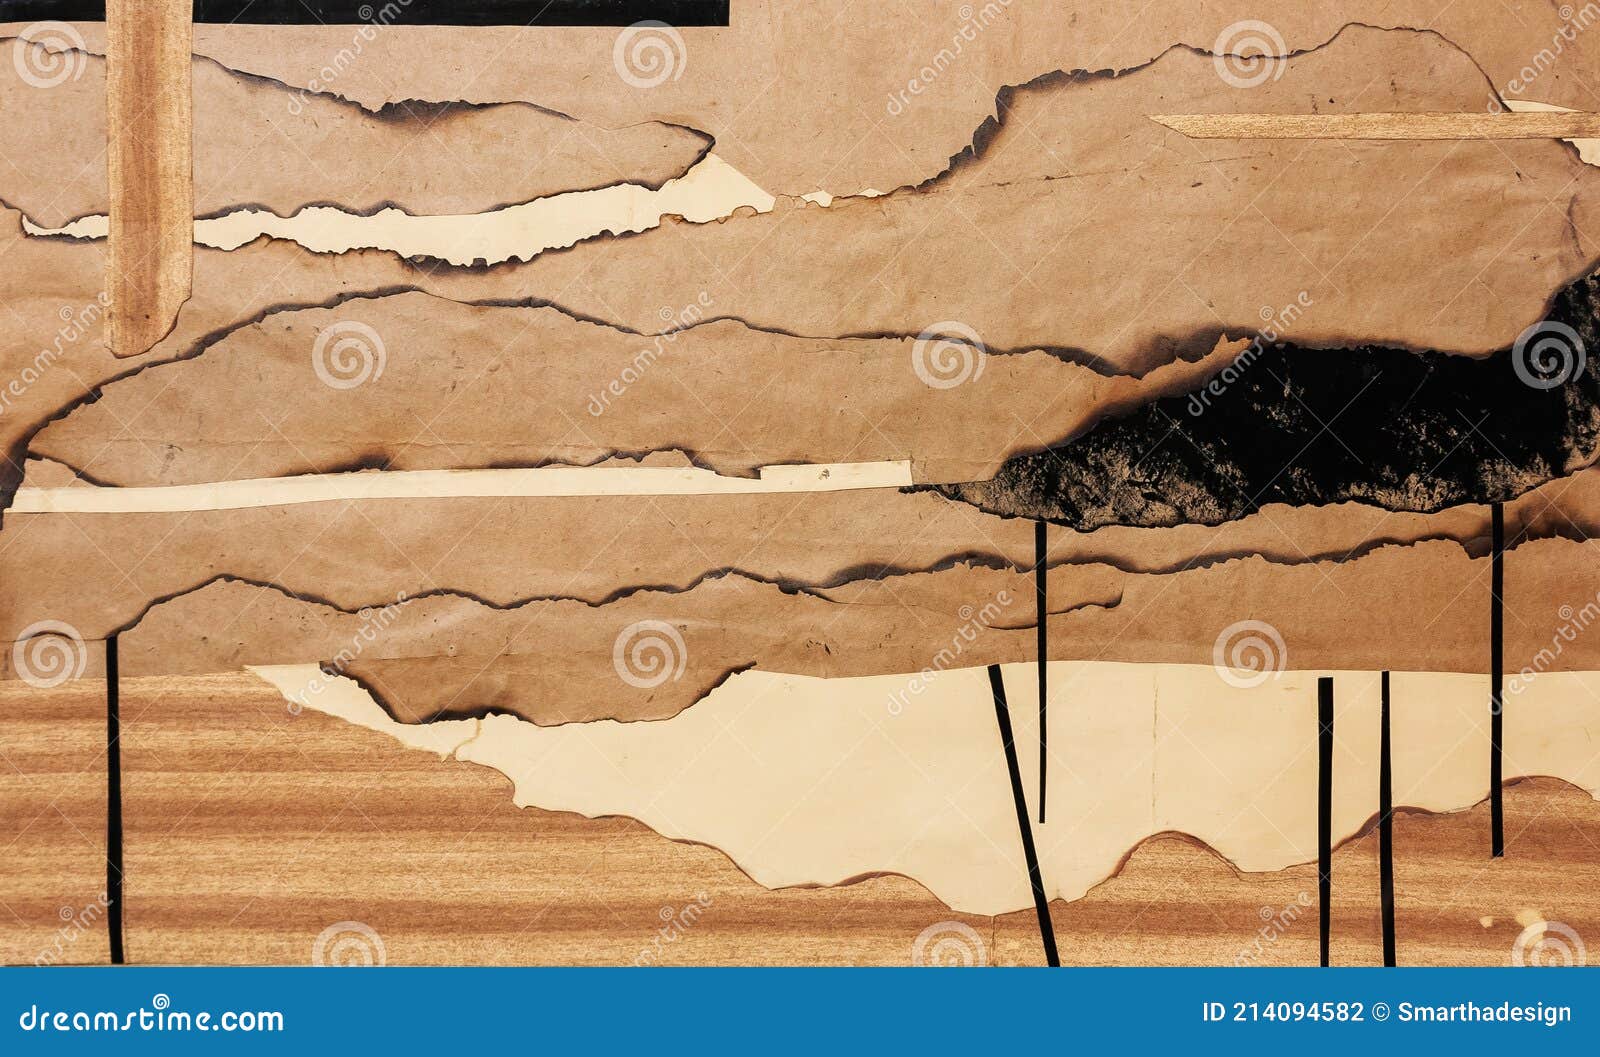 Landscape Desert Abstract Illustration. Outdoor Adventure Graphic Wallpaper  Stock Photo - Image of tourism, nature: 214094582